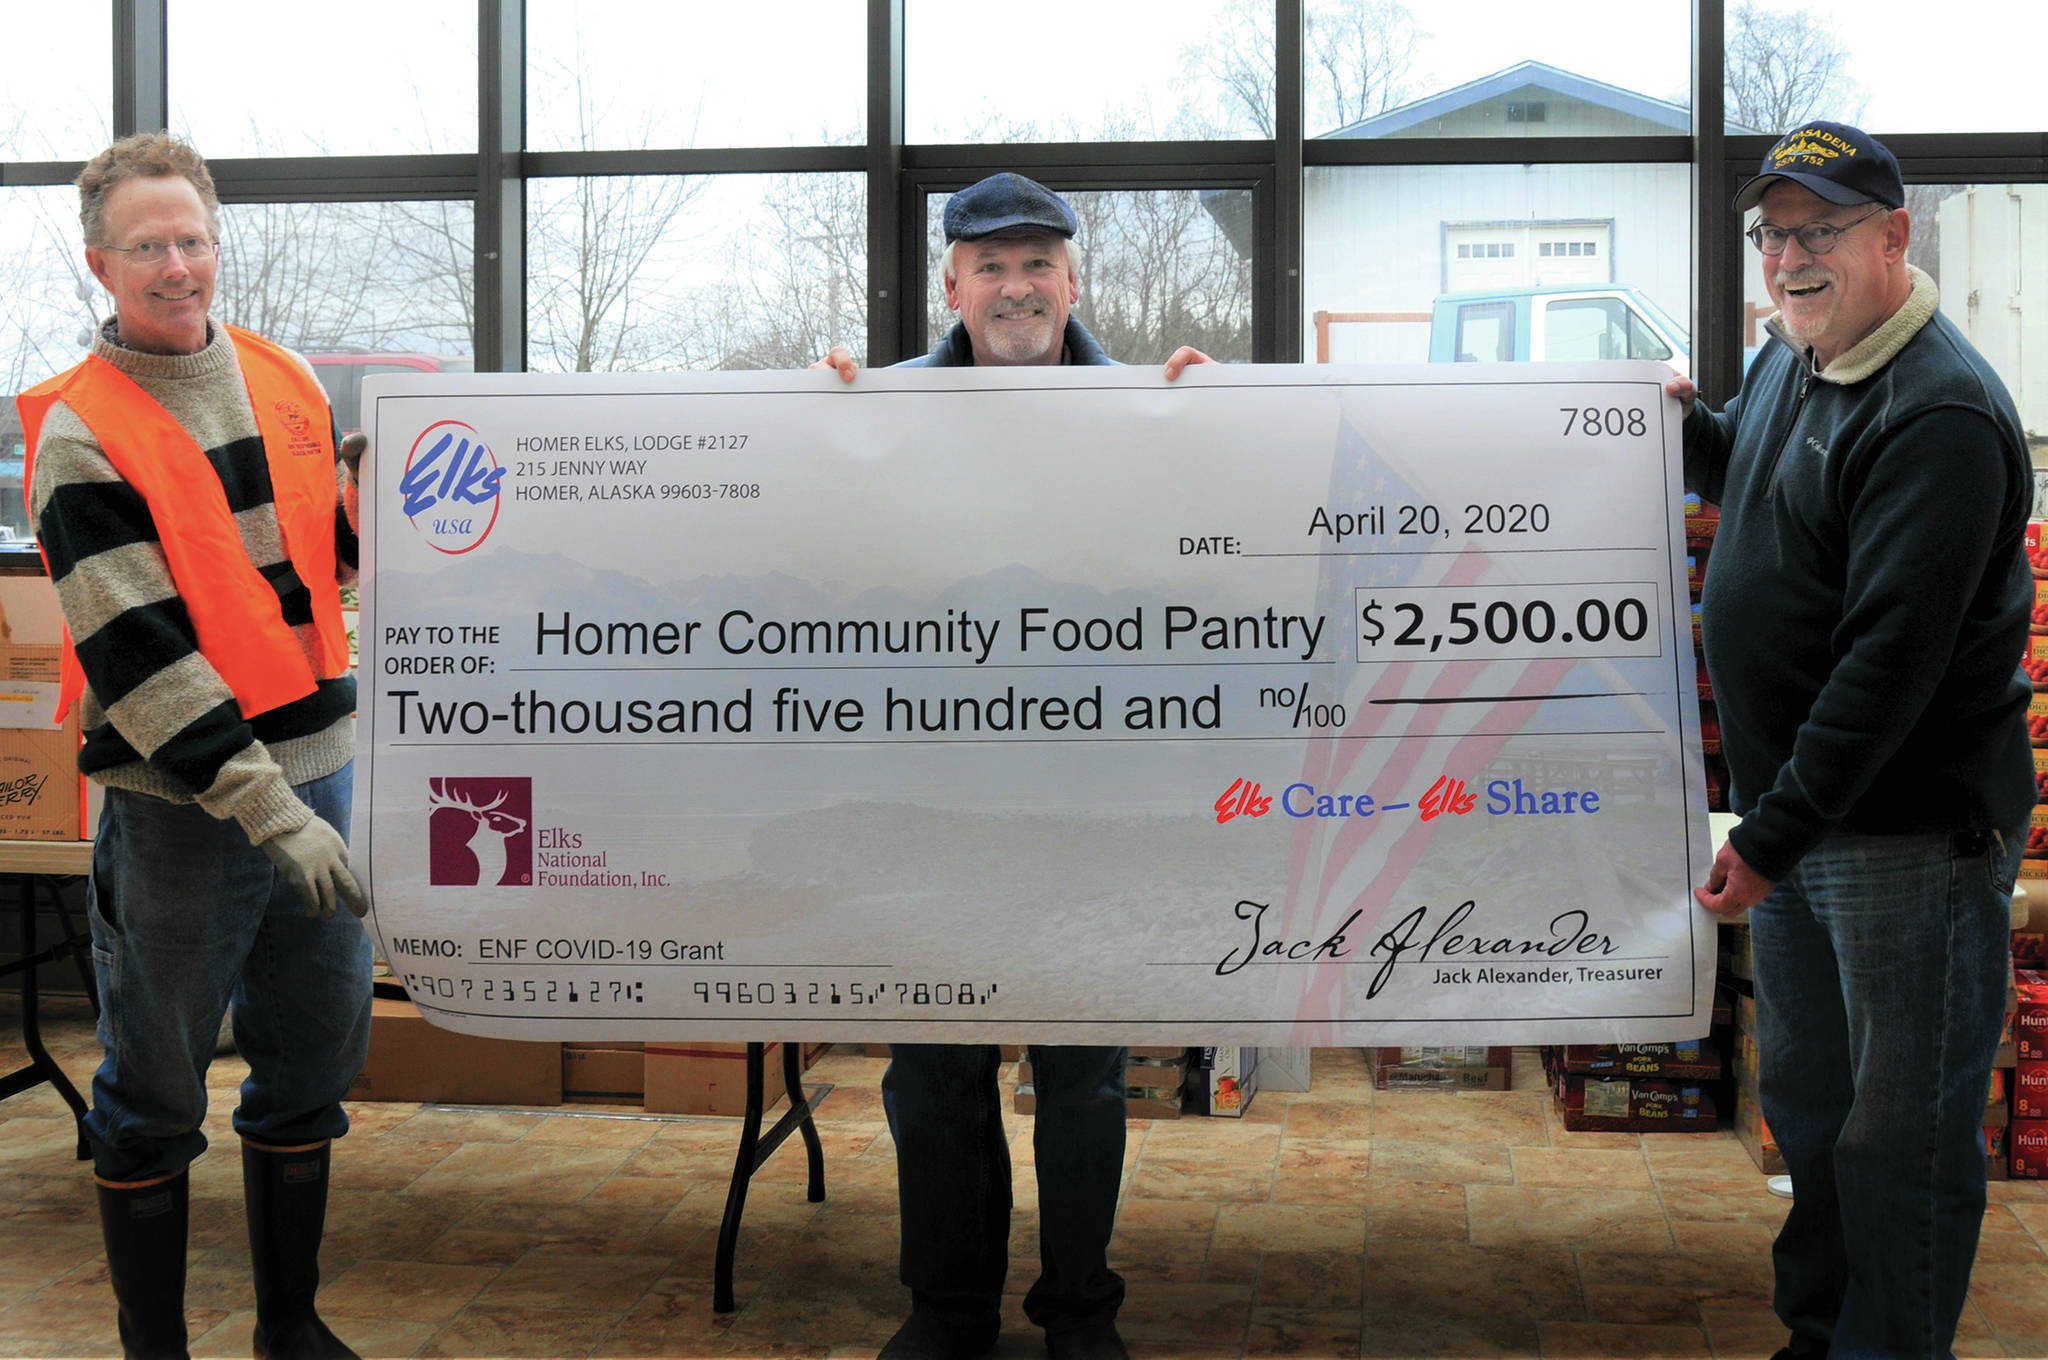 At left, Tom McDonough, President of the Homer Community Food Pantry, holds a check for a $2,500 donation to the food pantry from the Homer Elks Lodge #2127 given to the pantry on April 20, 2020, in Homer, Alaska. At center is Tom Stroozas, Homer Elks Grant Coordinator, and at right is Steve Mueller, President of Homer Elks Lodge. (Photo courtesy Homer Elks Lodge)